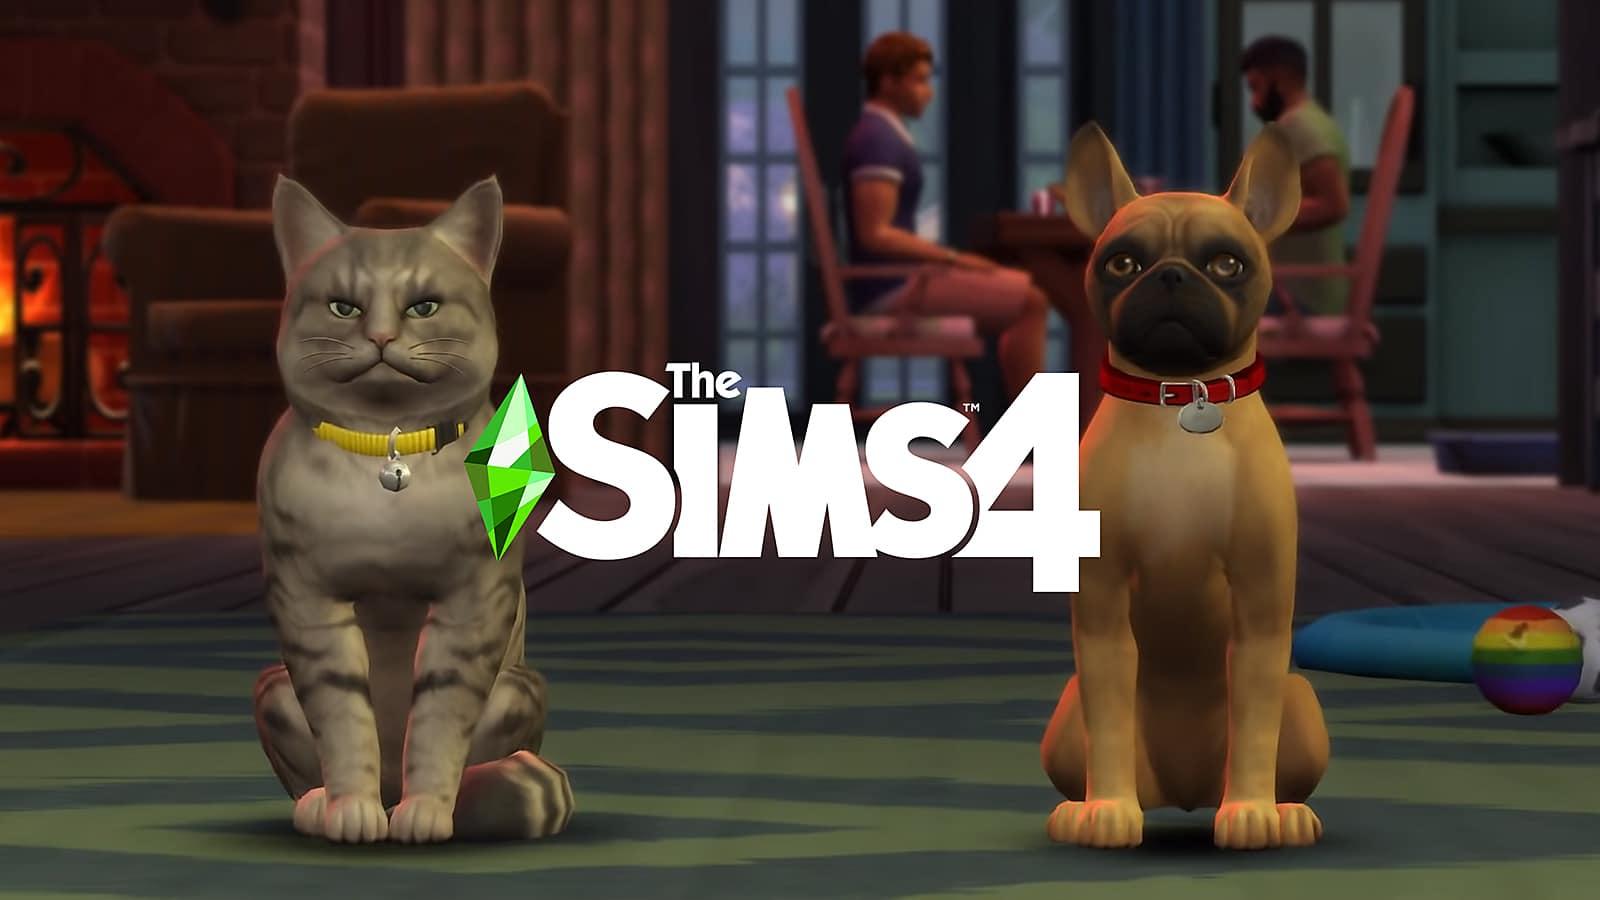 A cat and a dog from The Sims 4 Expansion Pack sitting next to one another with the game's logo in the center